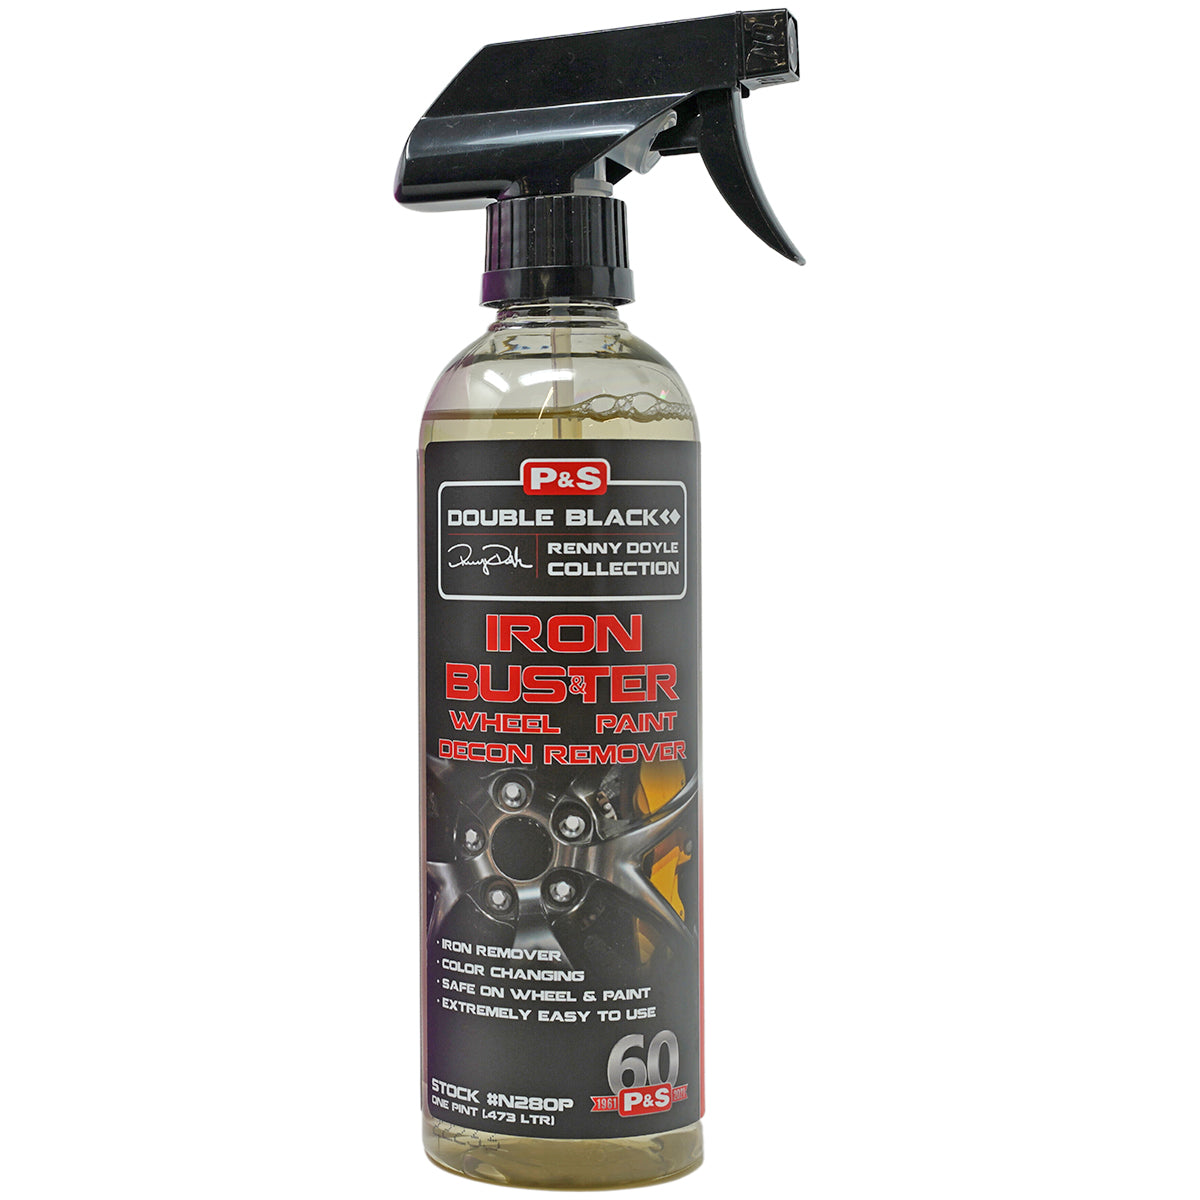 P&S Iron Buster Wheel & Paint Iron Remover